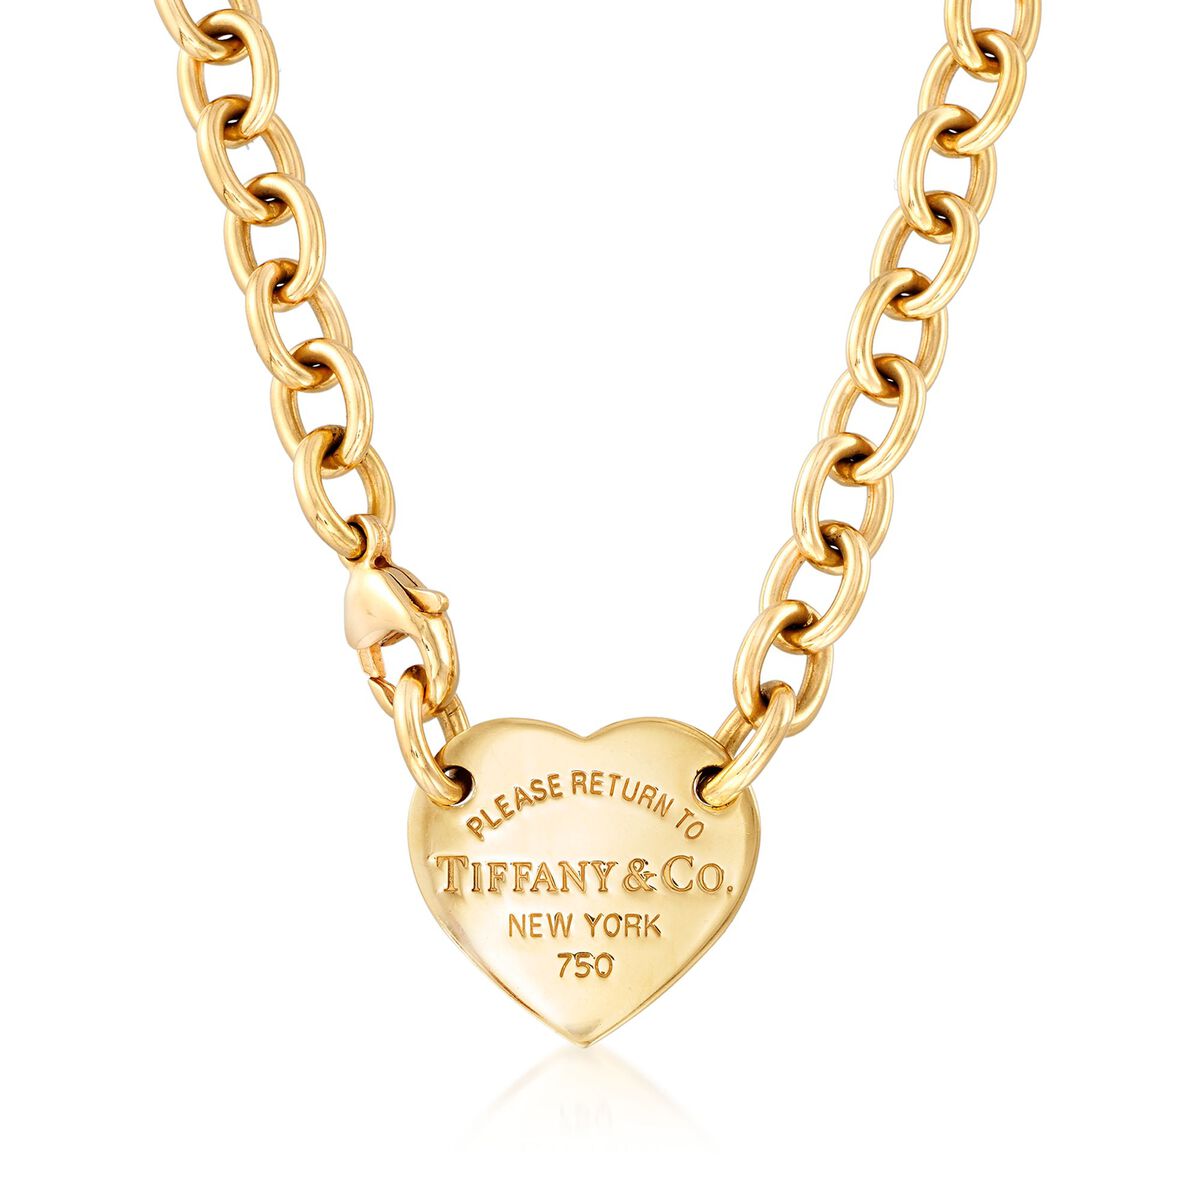 C. 1990 Vintage Tiffany Jewelry "Return to Tiffany" 18kt Yellow Gold Heart  Tag Necklace | Ross-Simons